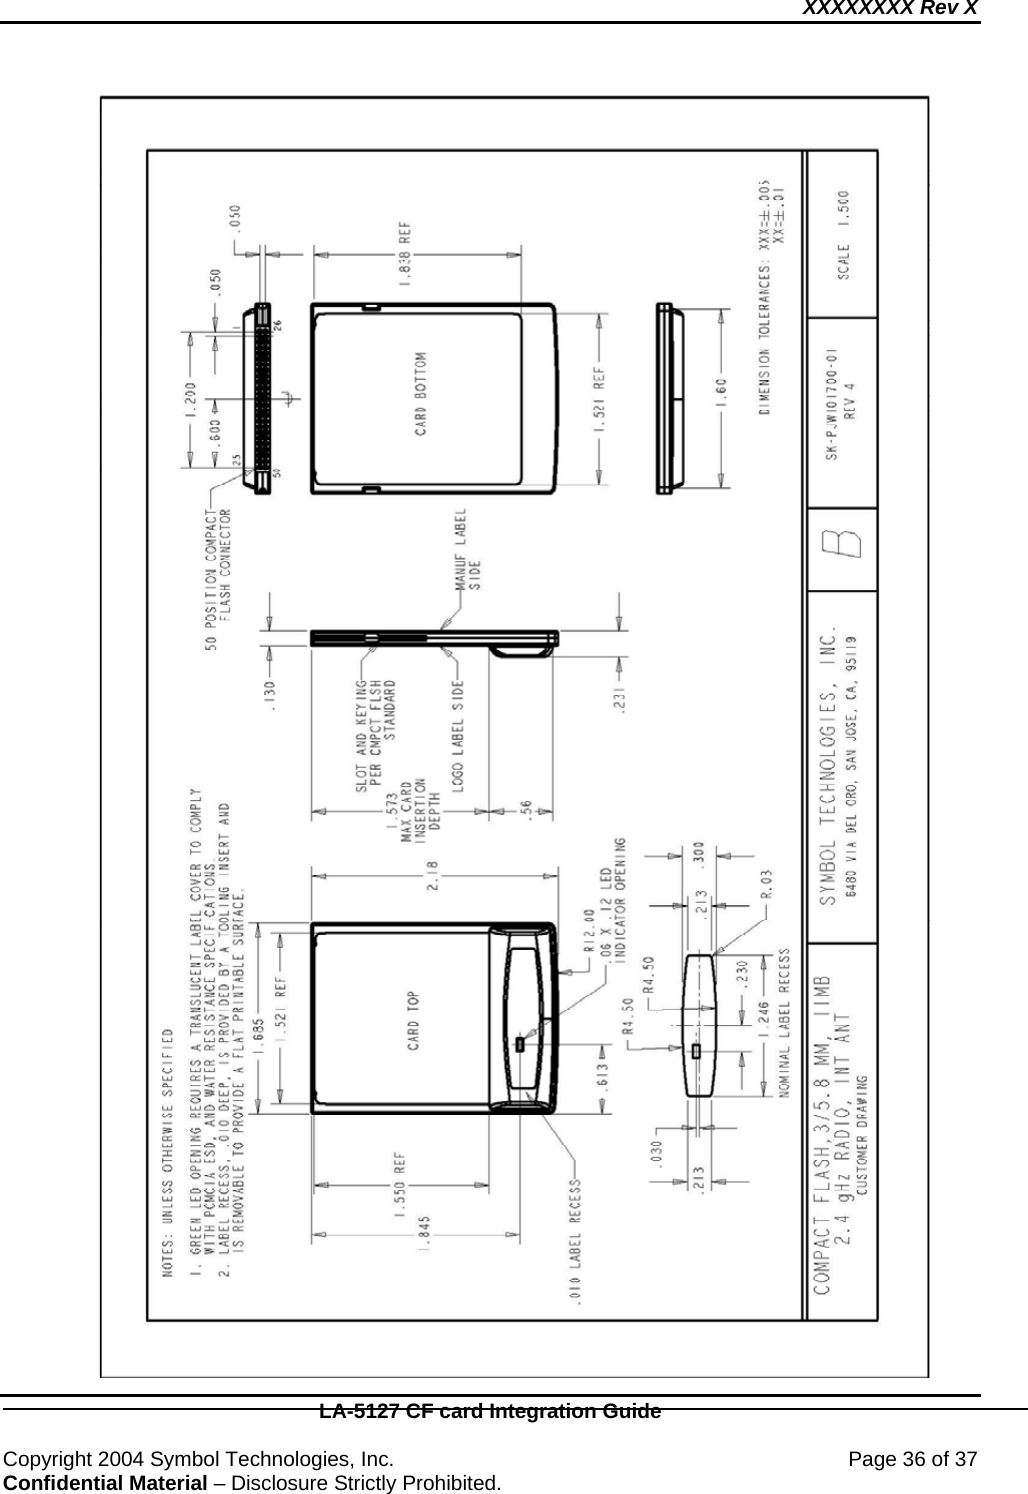 XXXXXXXX Rev X    LA-5127 CF card Integration Guide  Copyright 2004 Symbol Technologies, Inc.    Page 36 of 37 Confidential Material – Disclosure Strictly Prohibited.  